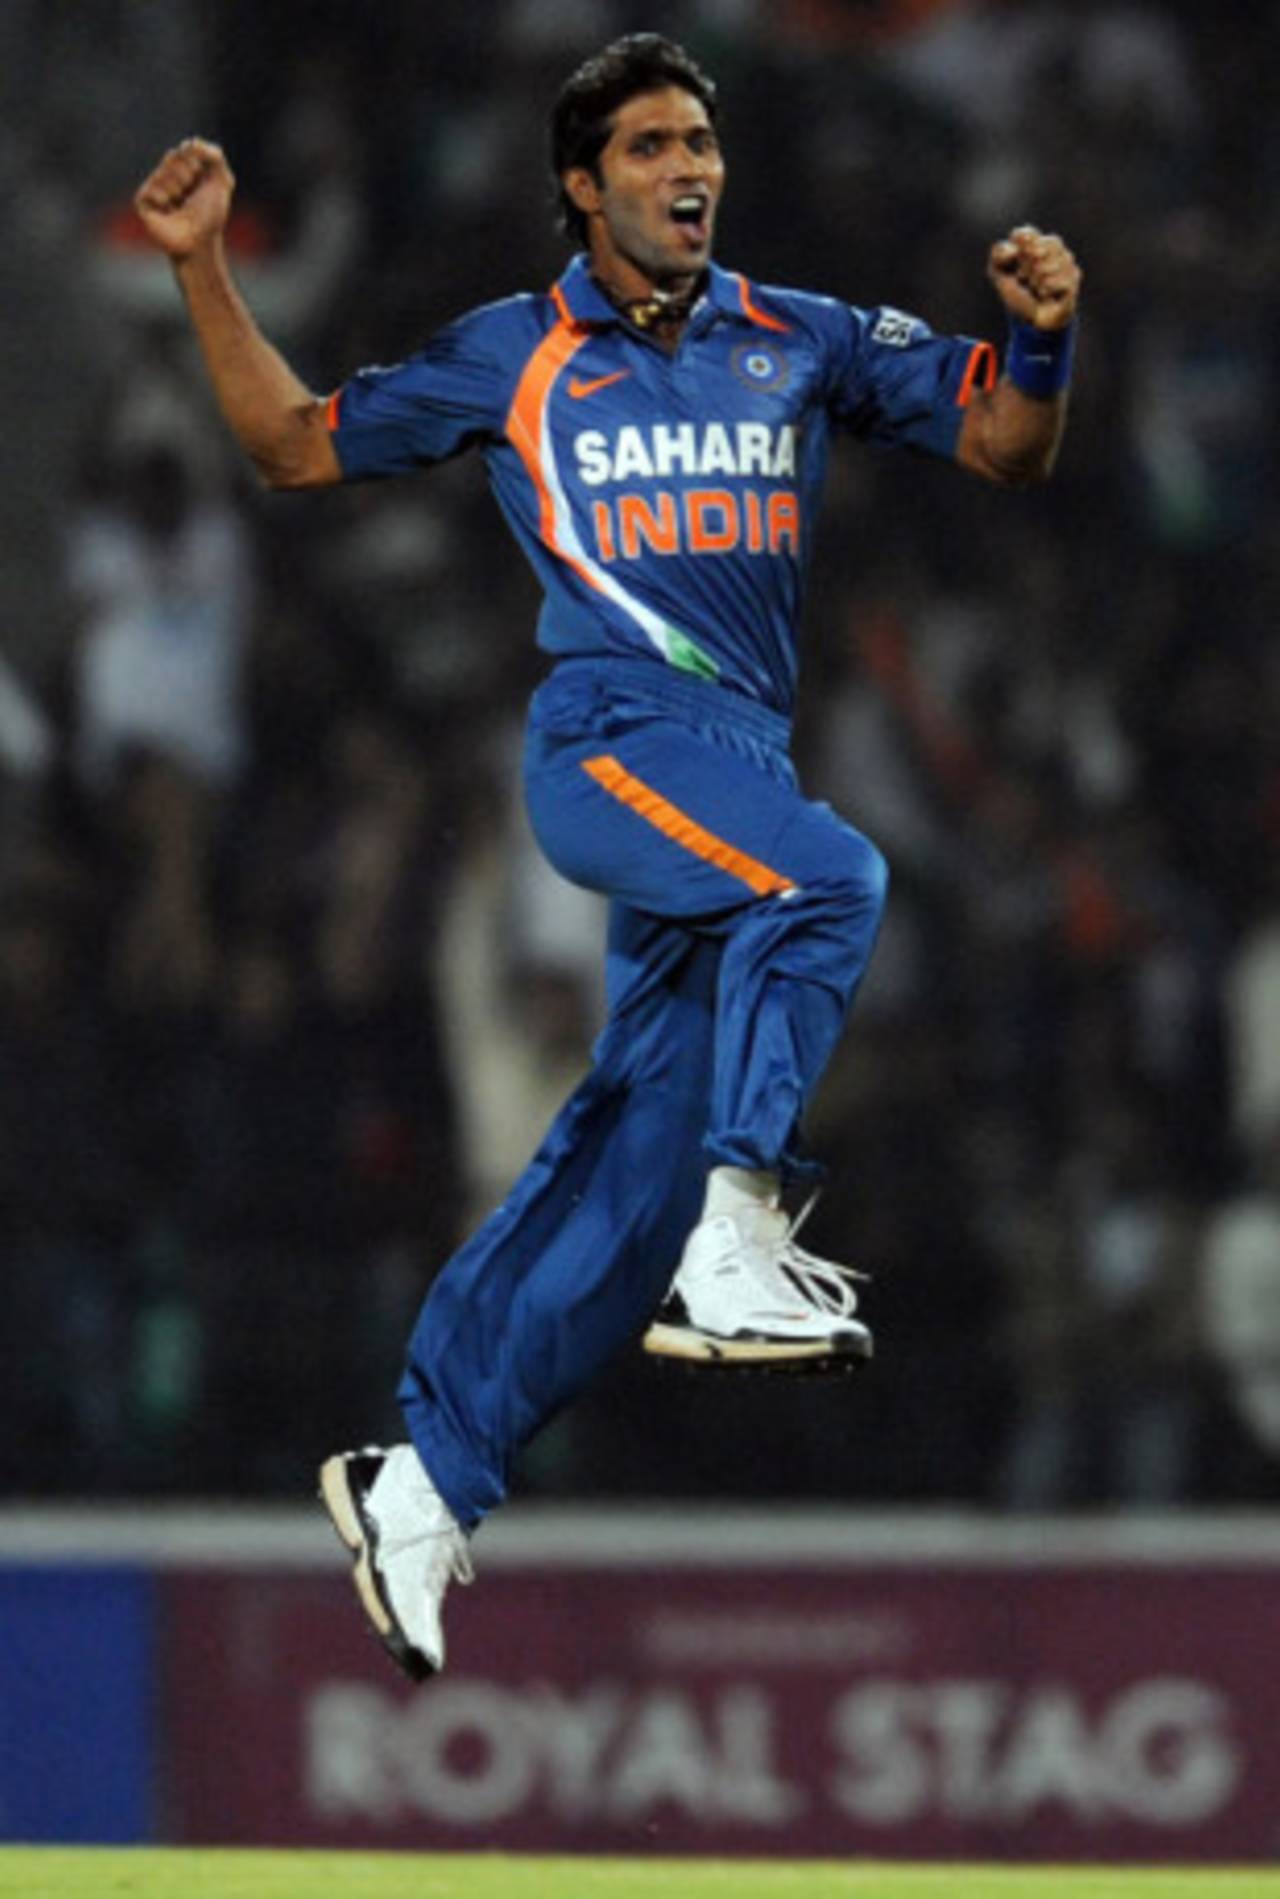 Of the half-dozen bowlers tried by India in the recent past, only Ashok Dinda has made it to Sri Lanka&nbsp;&nbsp;&bull;&nbsp;&nbsp;AFP